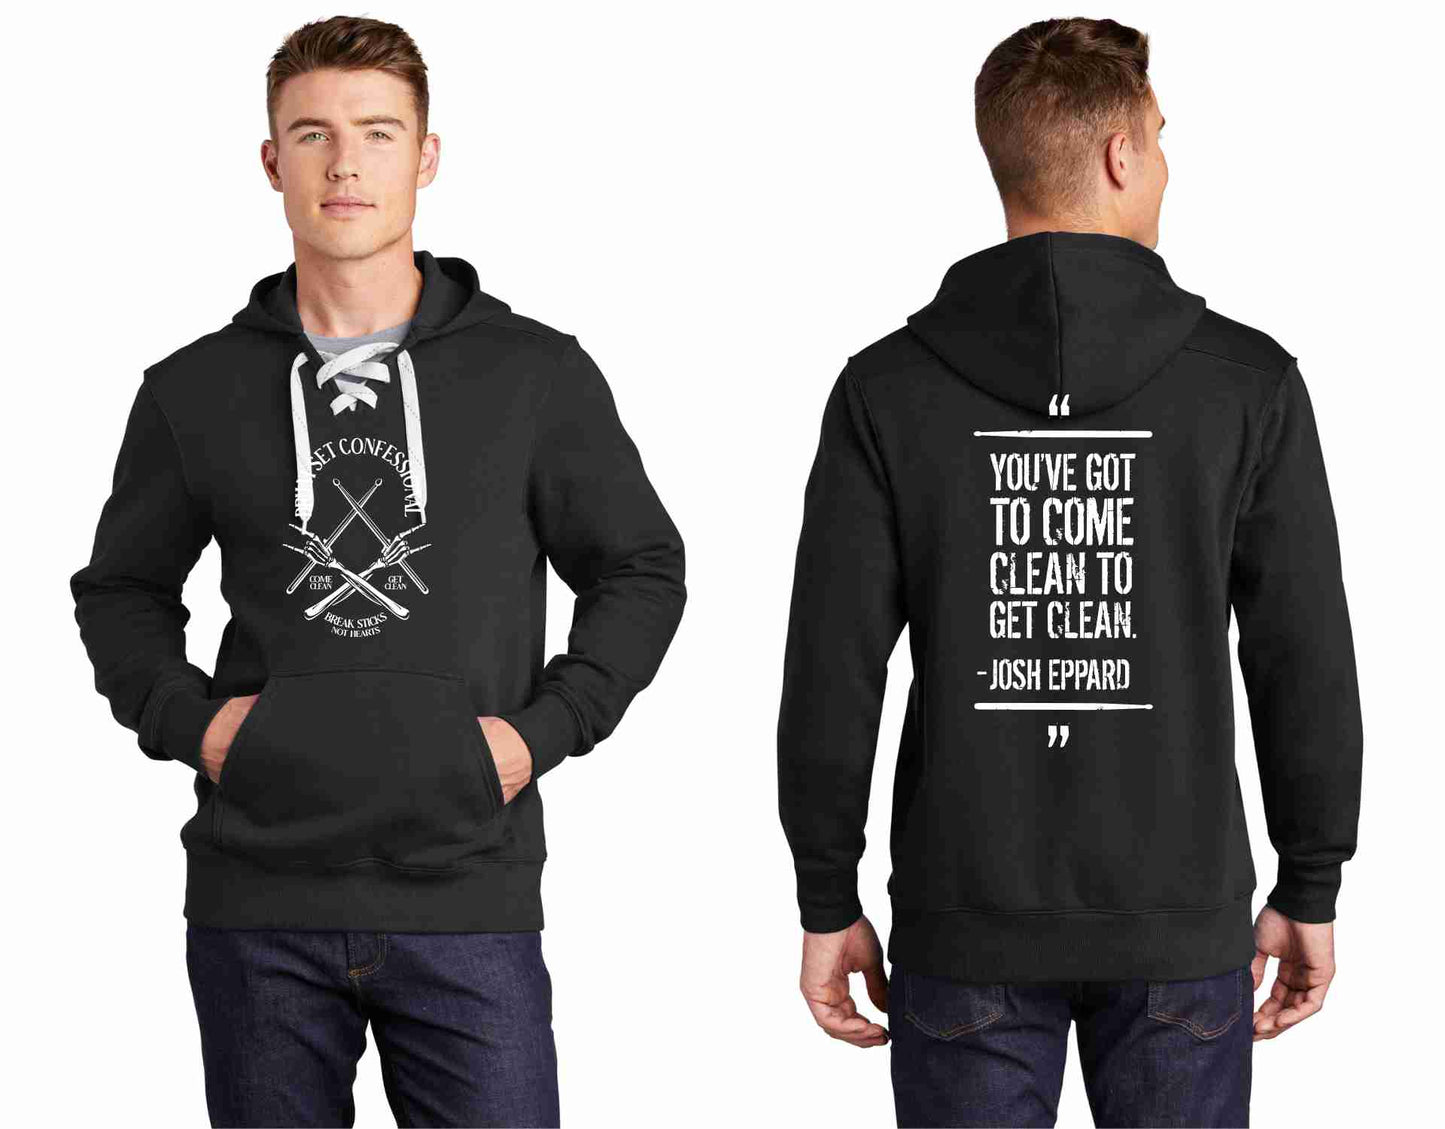 DSC "Bones" Black Sport-Tek Lace Up Pullover Hooded Sweatshirt (100% of profits fuel outreach and donations to addiction/recovery causes.)